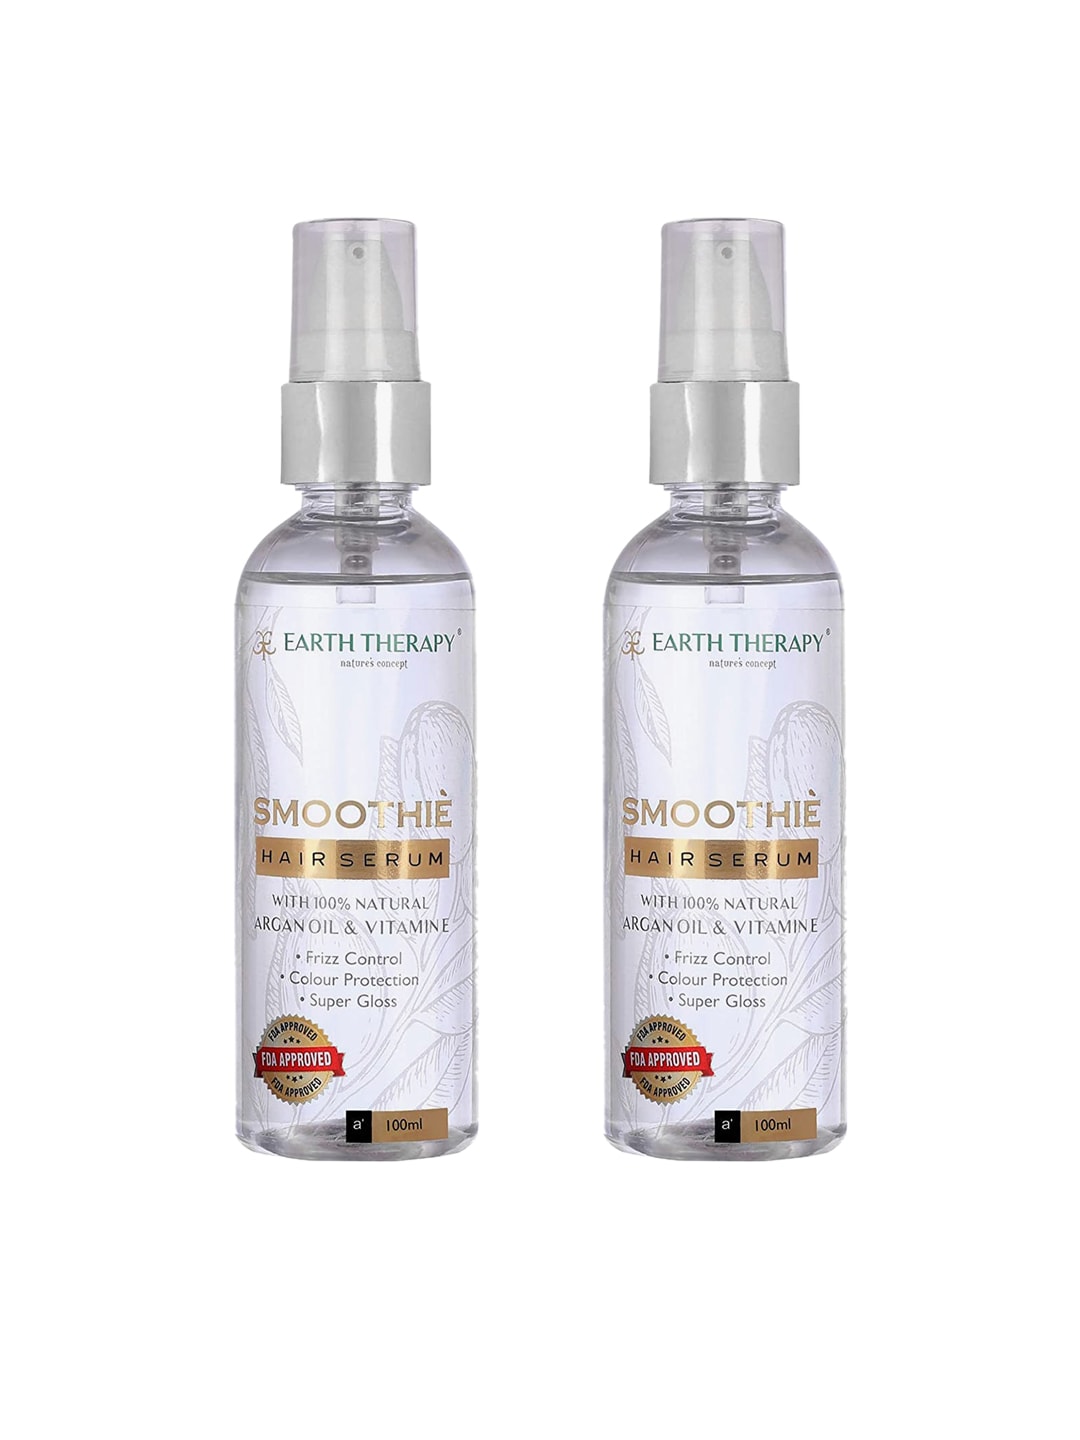 EARTH THERAPY Set of 2 Smoothie Hair Serum with Argan Oil & Vitamin E - 100 ml each Price in India